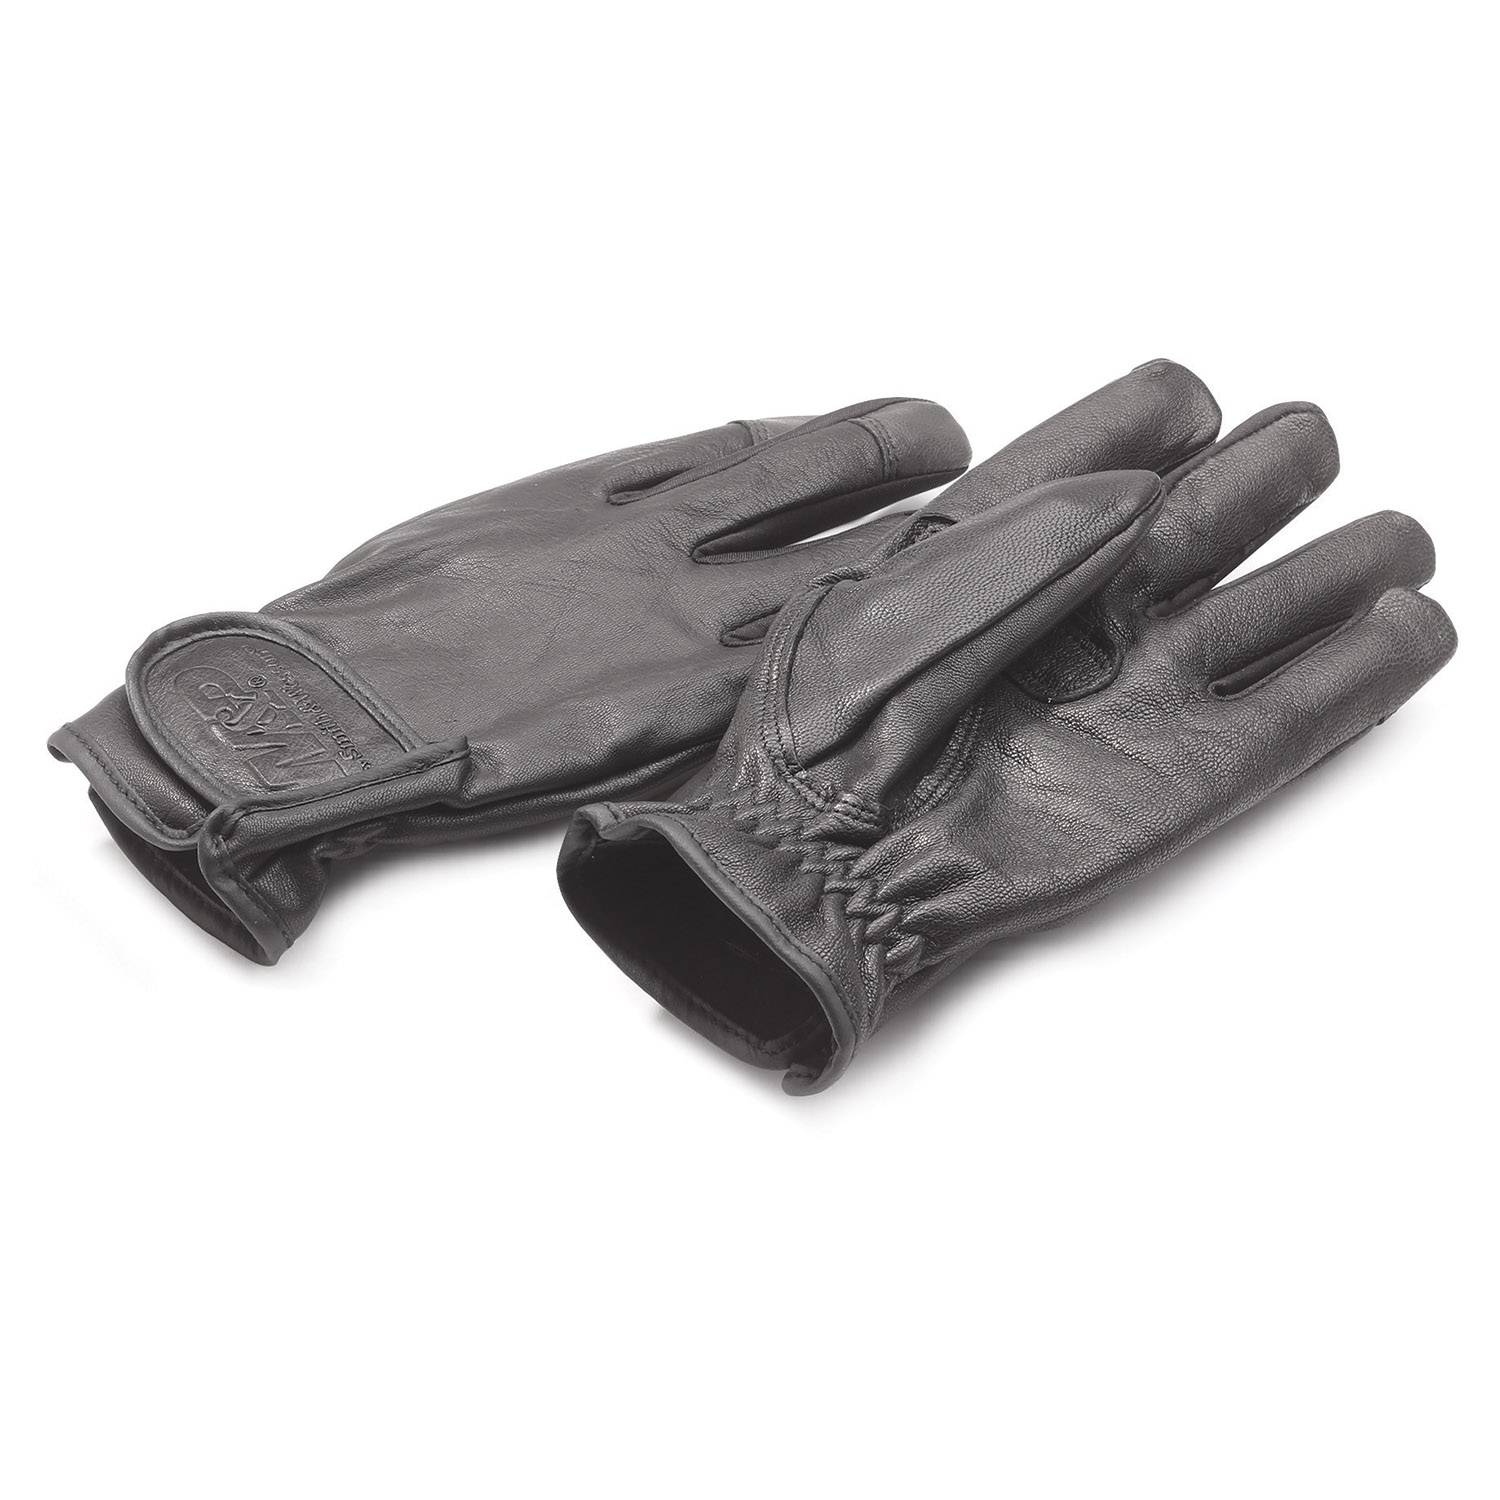 Smith & Wesson Military and Police All Leather Gloves